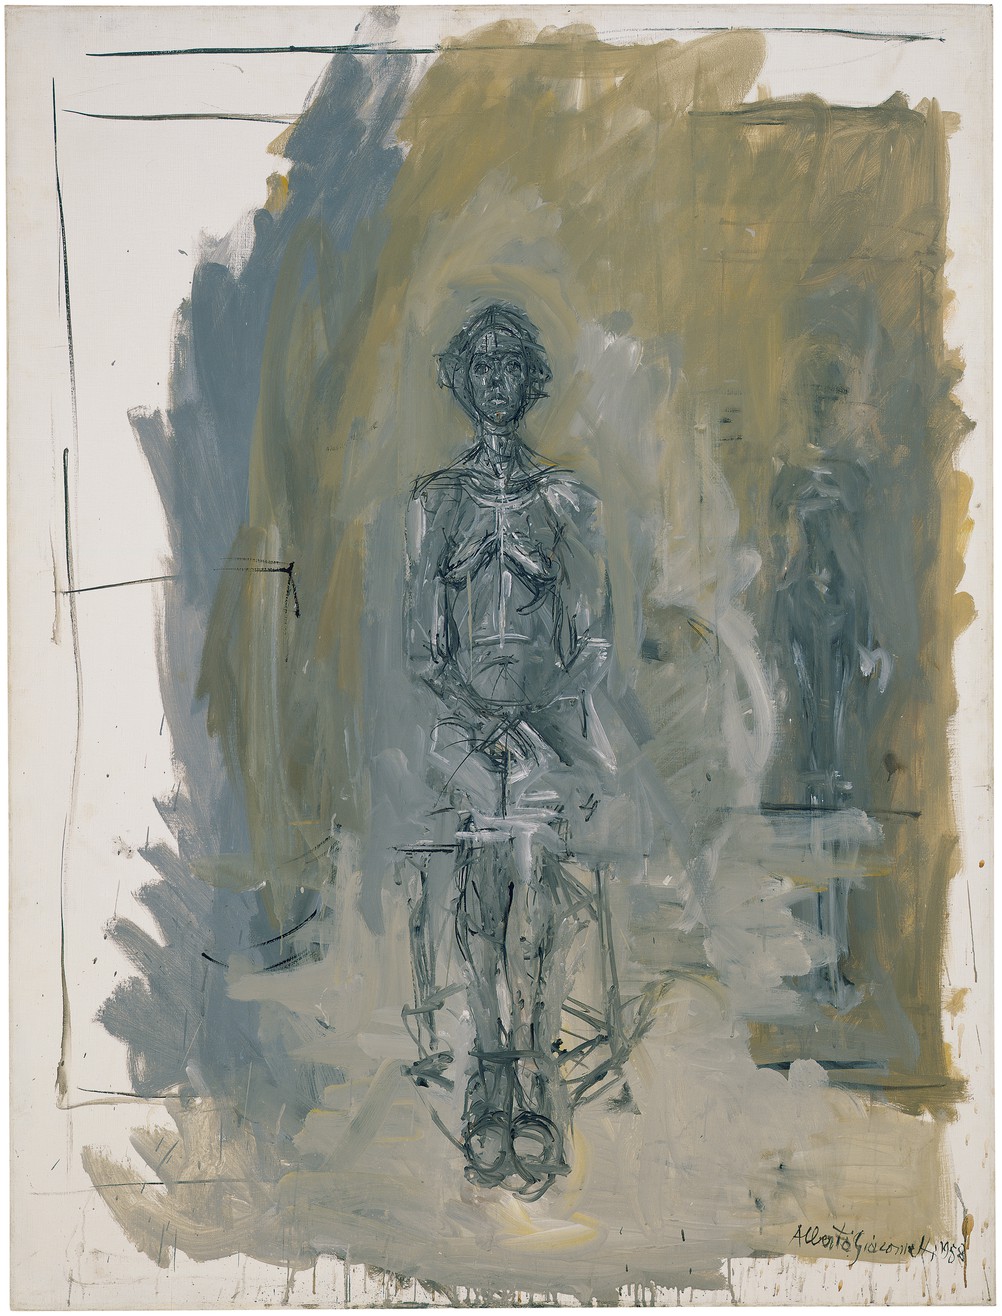 About the Artwork M9 Qj Tl9 Oh Hrh 2340x1316  by Alberto Giacometti